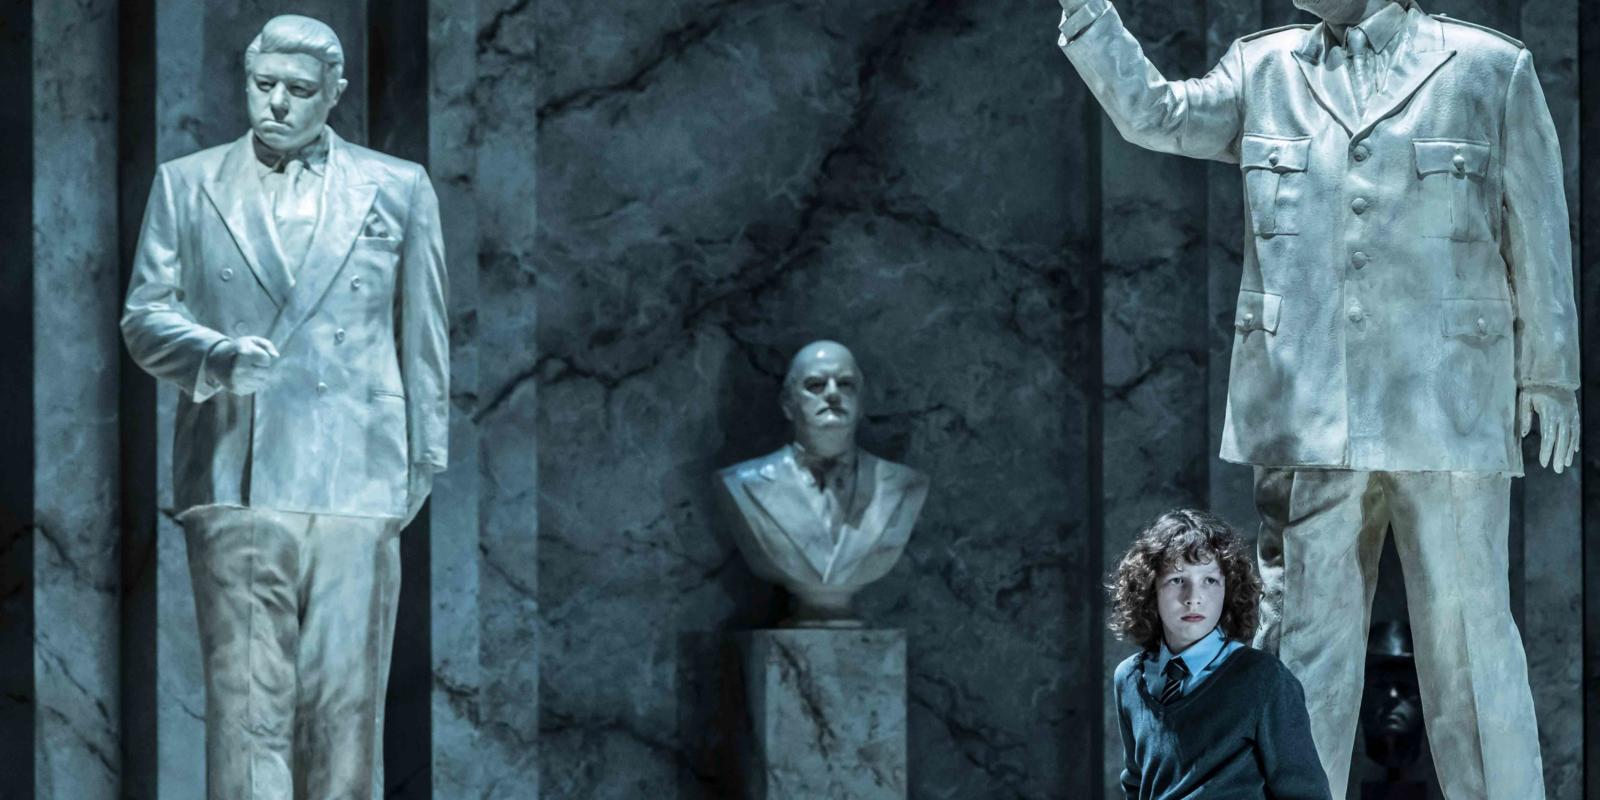 young boy in front of three male statues in ENO's The Winter's Tale